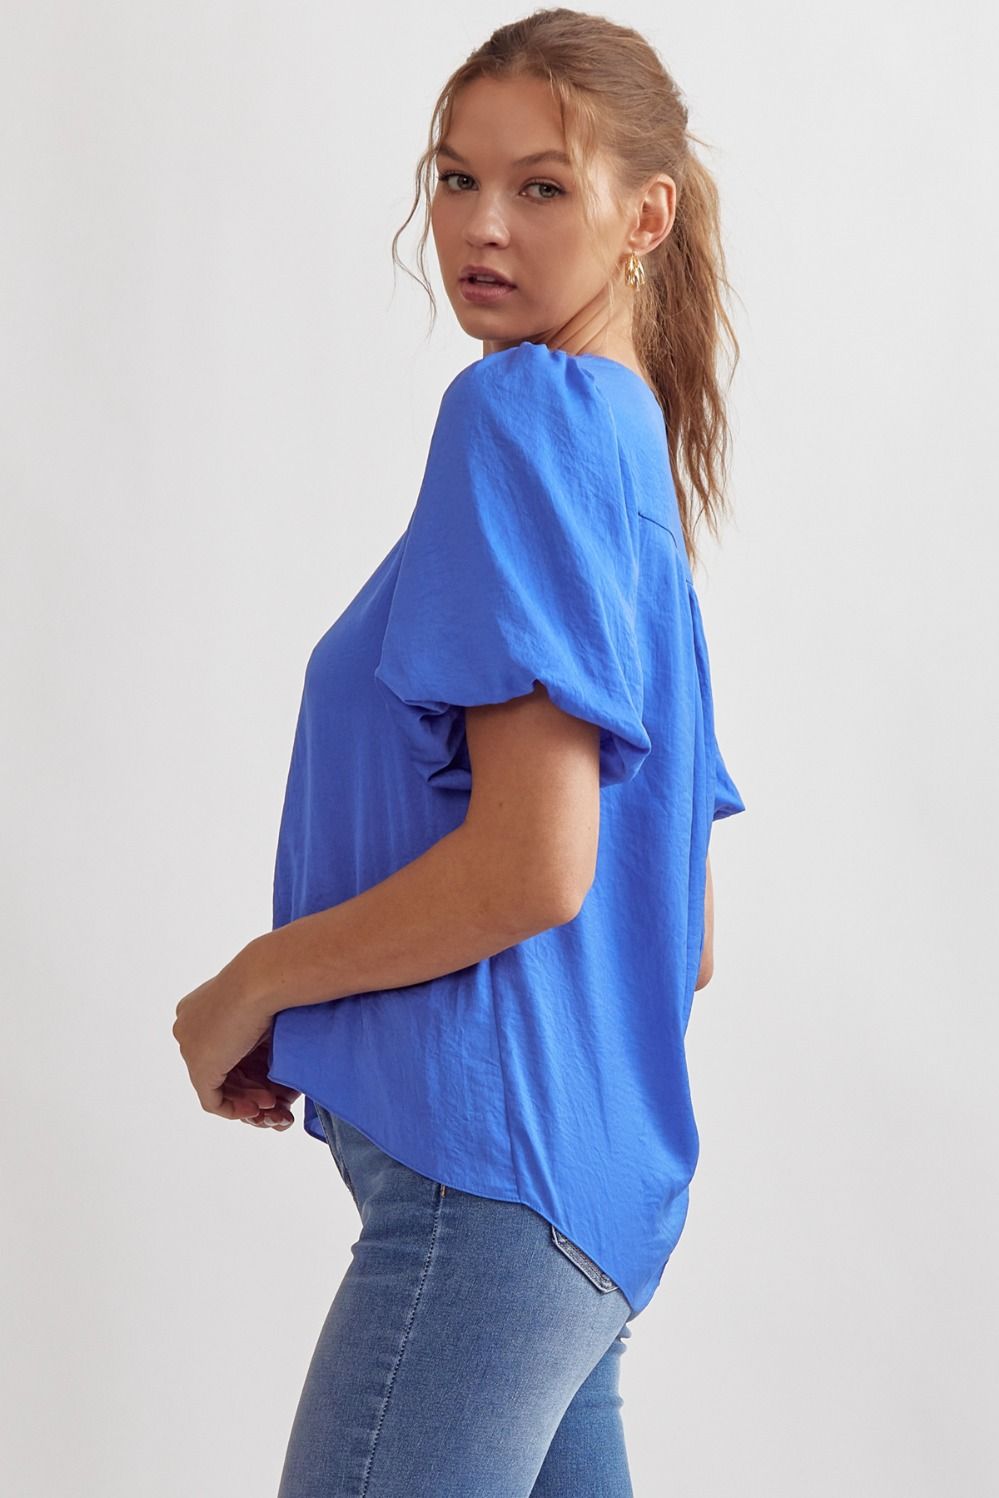 The Heather blue puff sleeve top